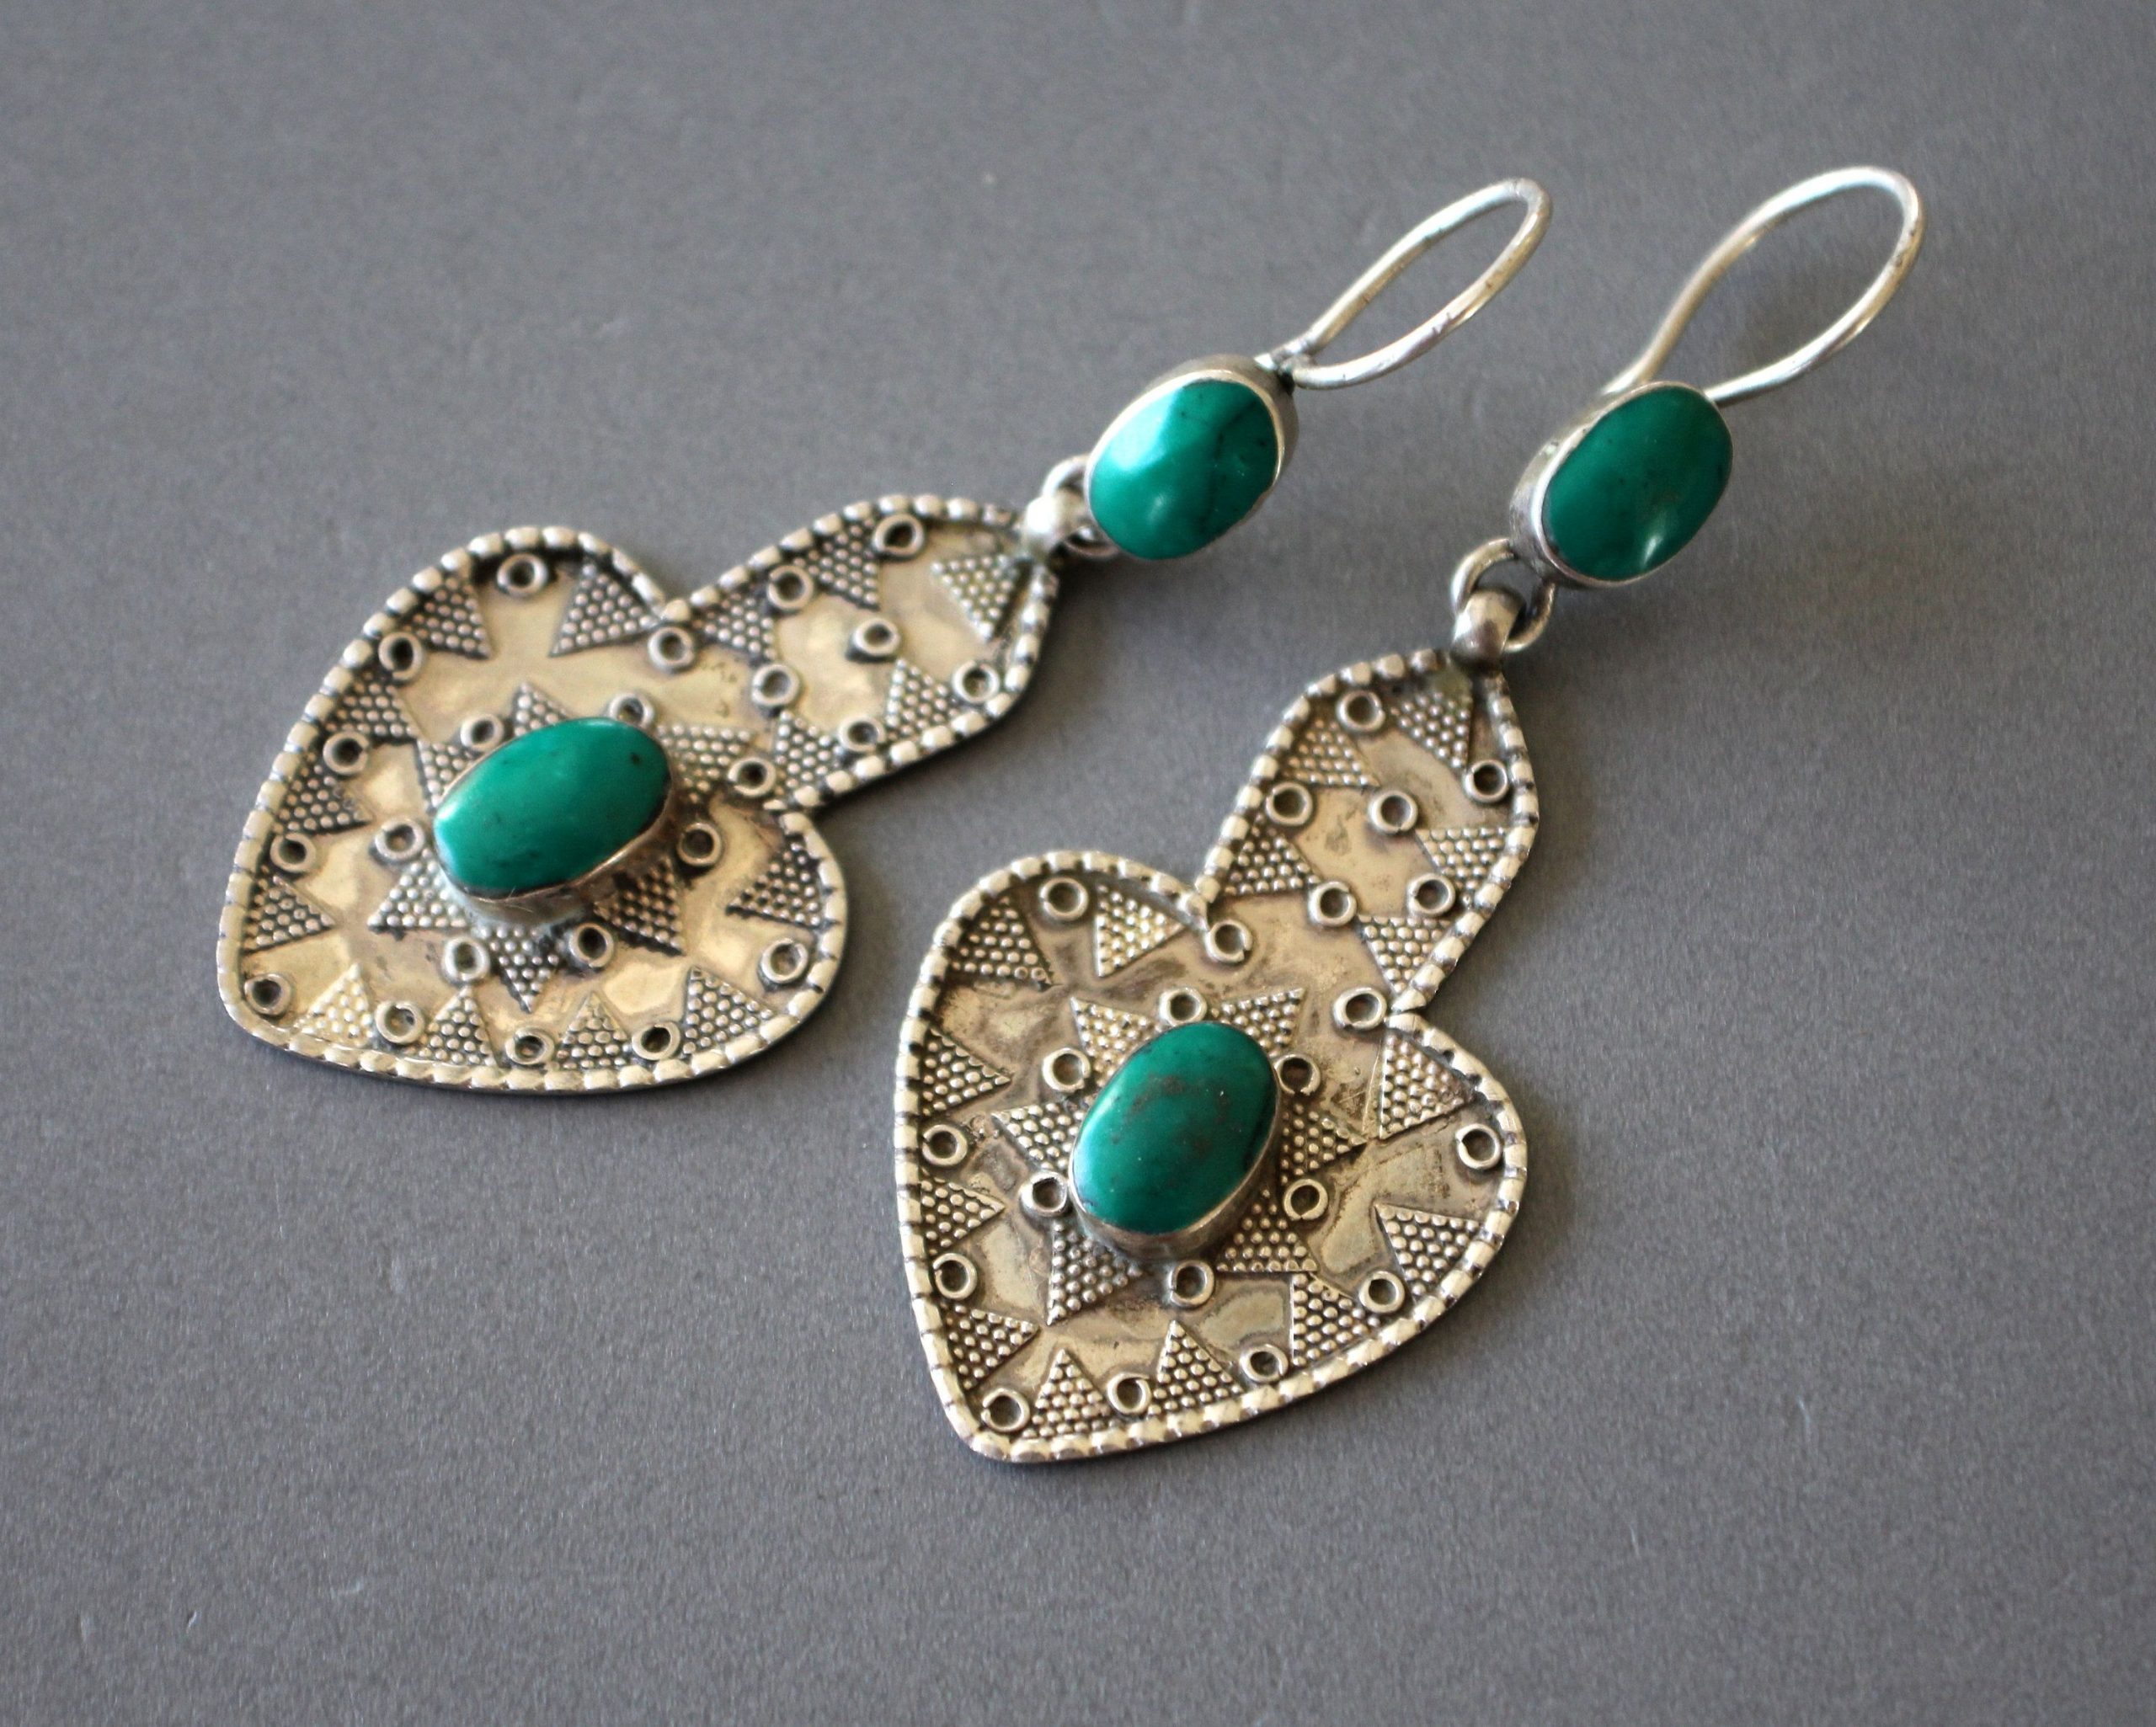 4 Tips To Purchase The Perfect Kazakh Earrings And Other Fashion Jewellery